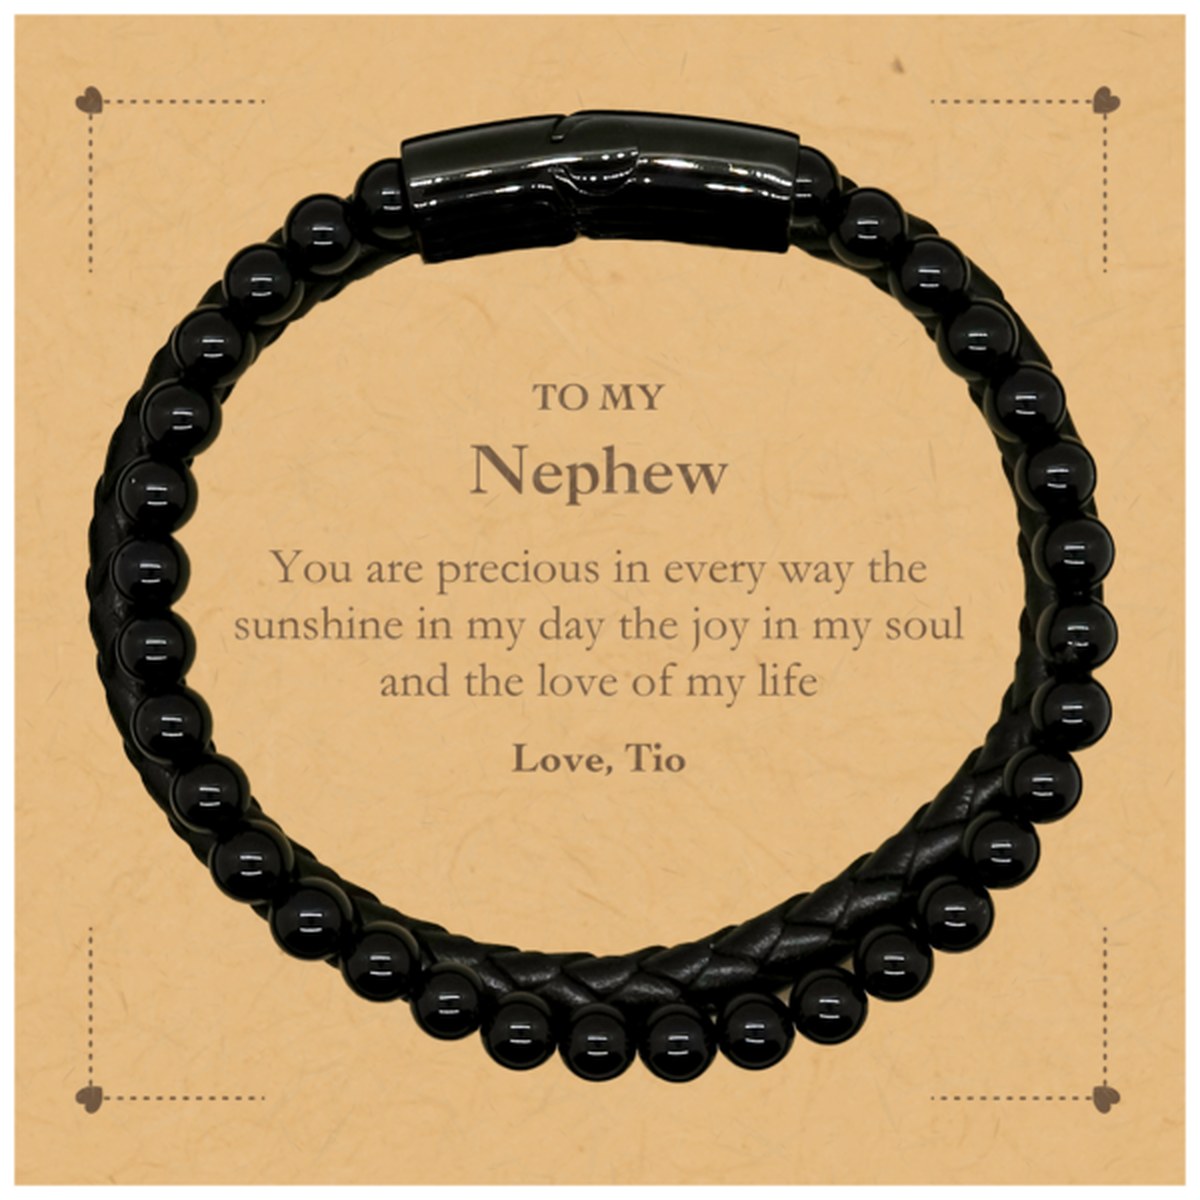 Graduation Gifts for Nephew Stone Leather Bracelets Present from Tio, Christmas Nephew Birthday Gifts Nephew You are precious in every way the sunshine in my day. Love, Tio